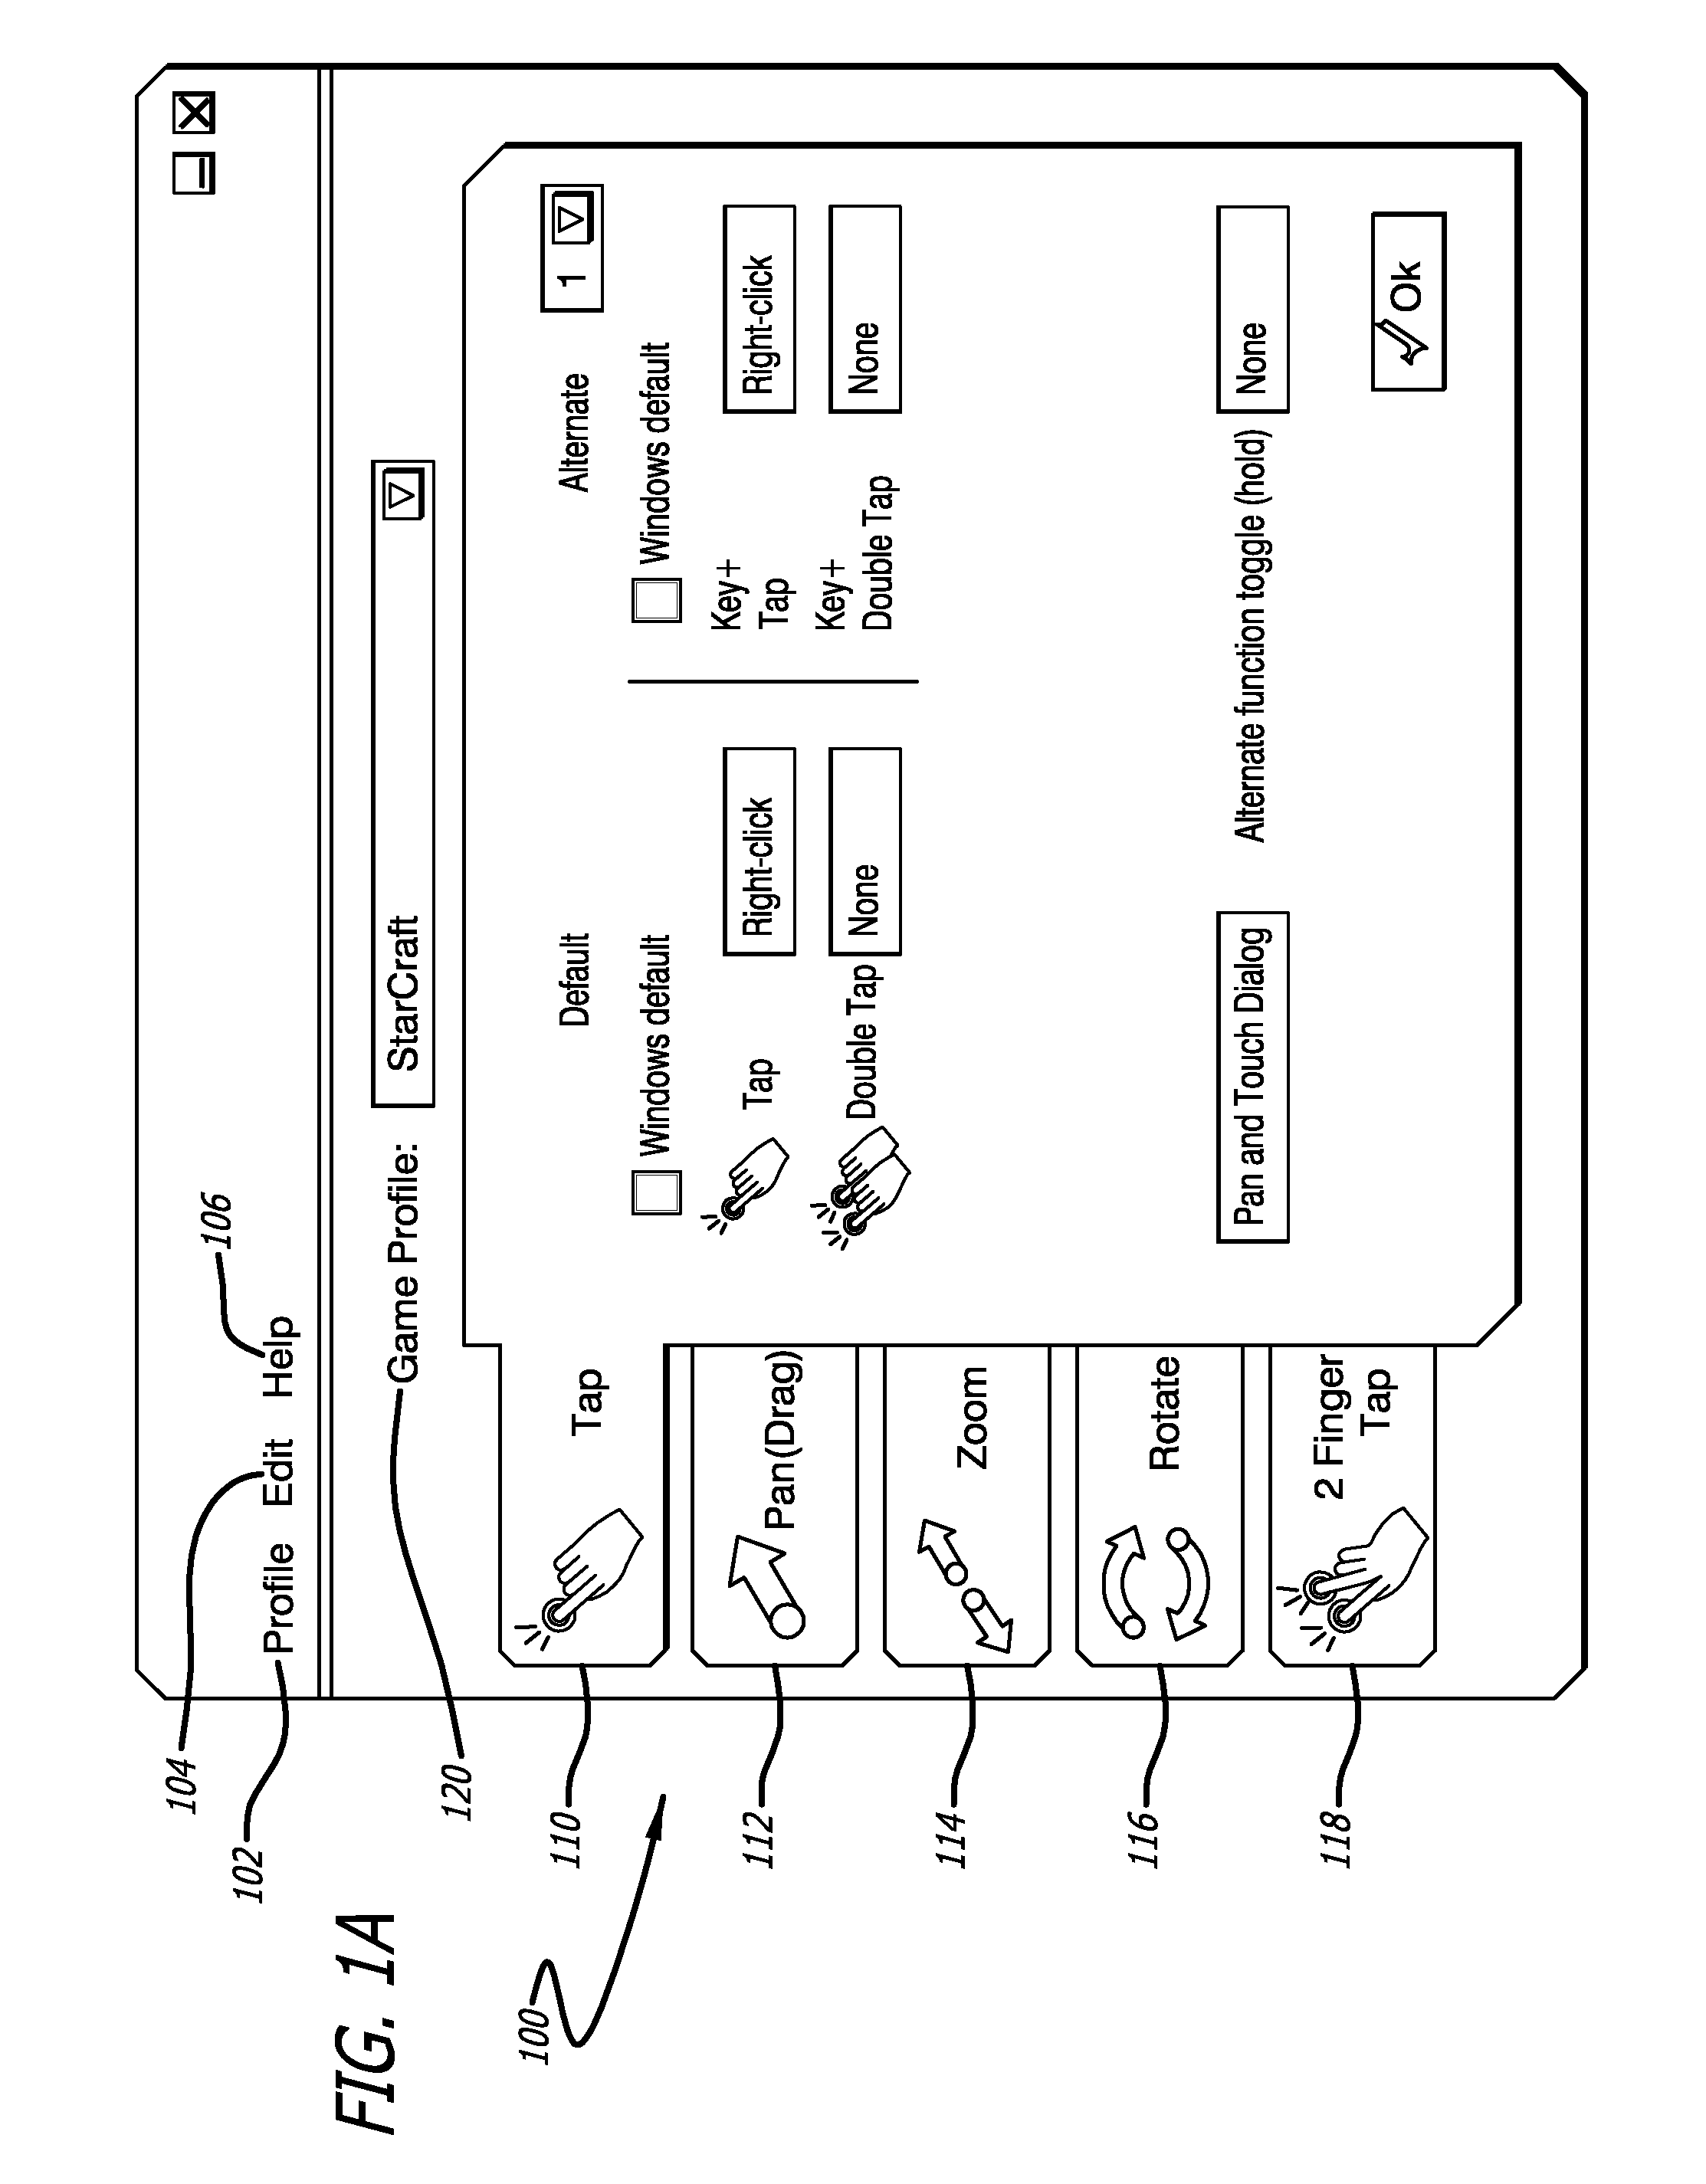 Method and System of Implementing Multi-Touch Panel Gestures in Computer Applications Without Multi-Touch Panel Functions